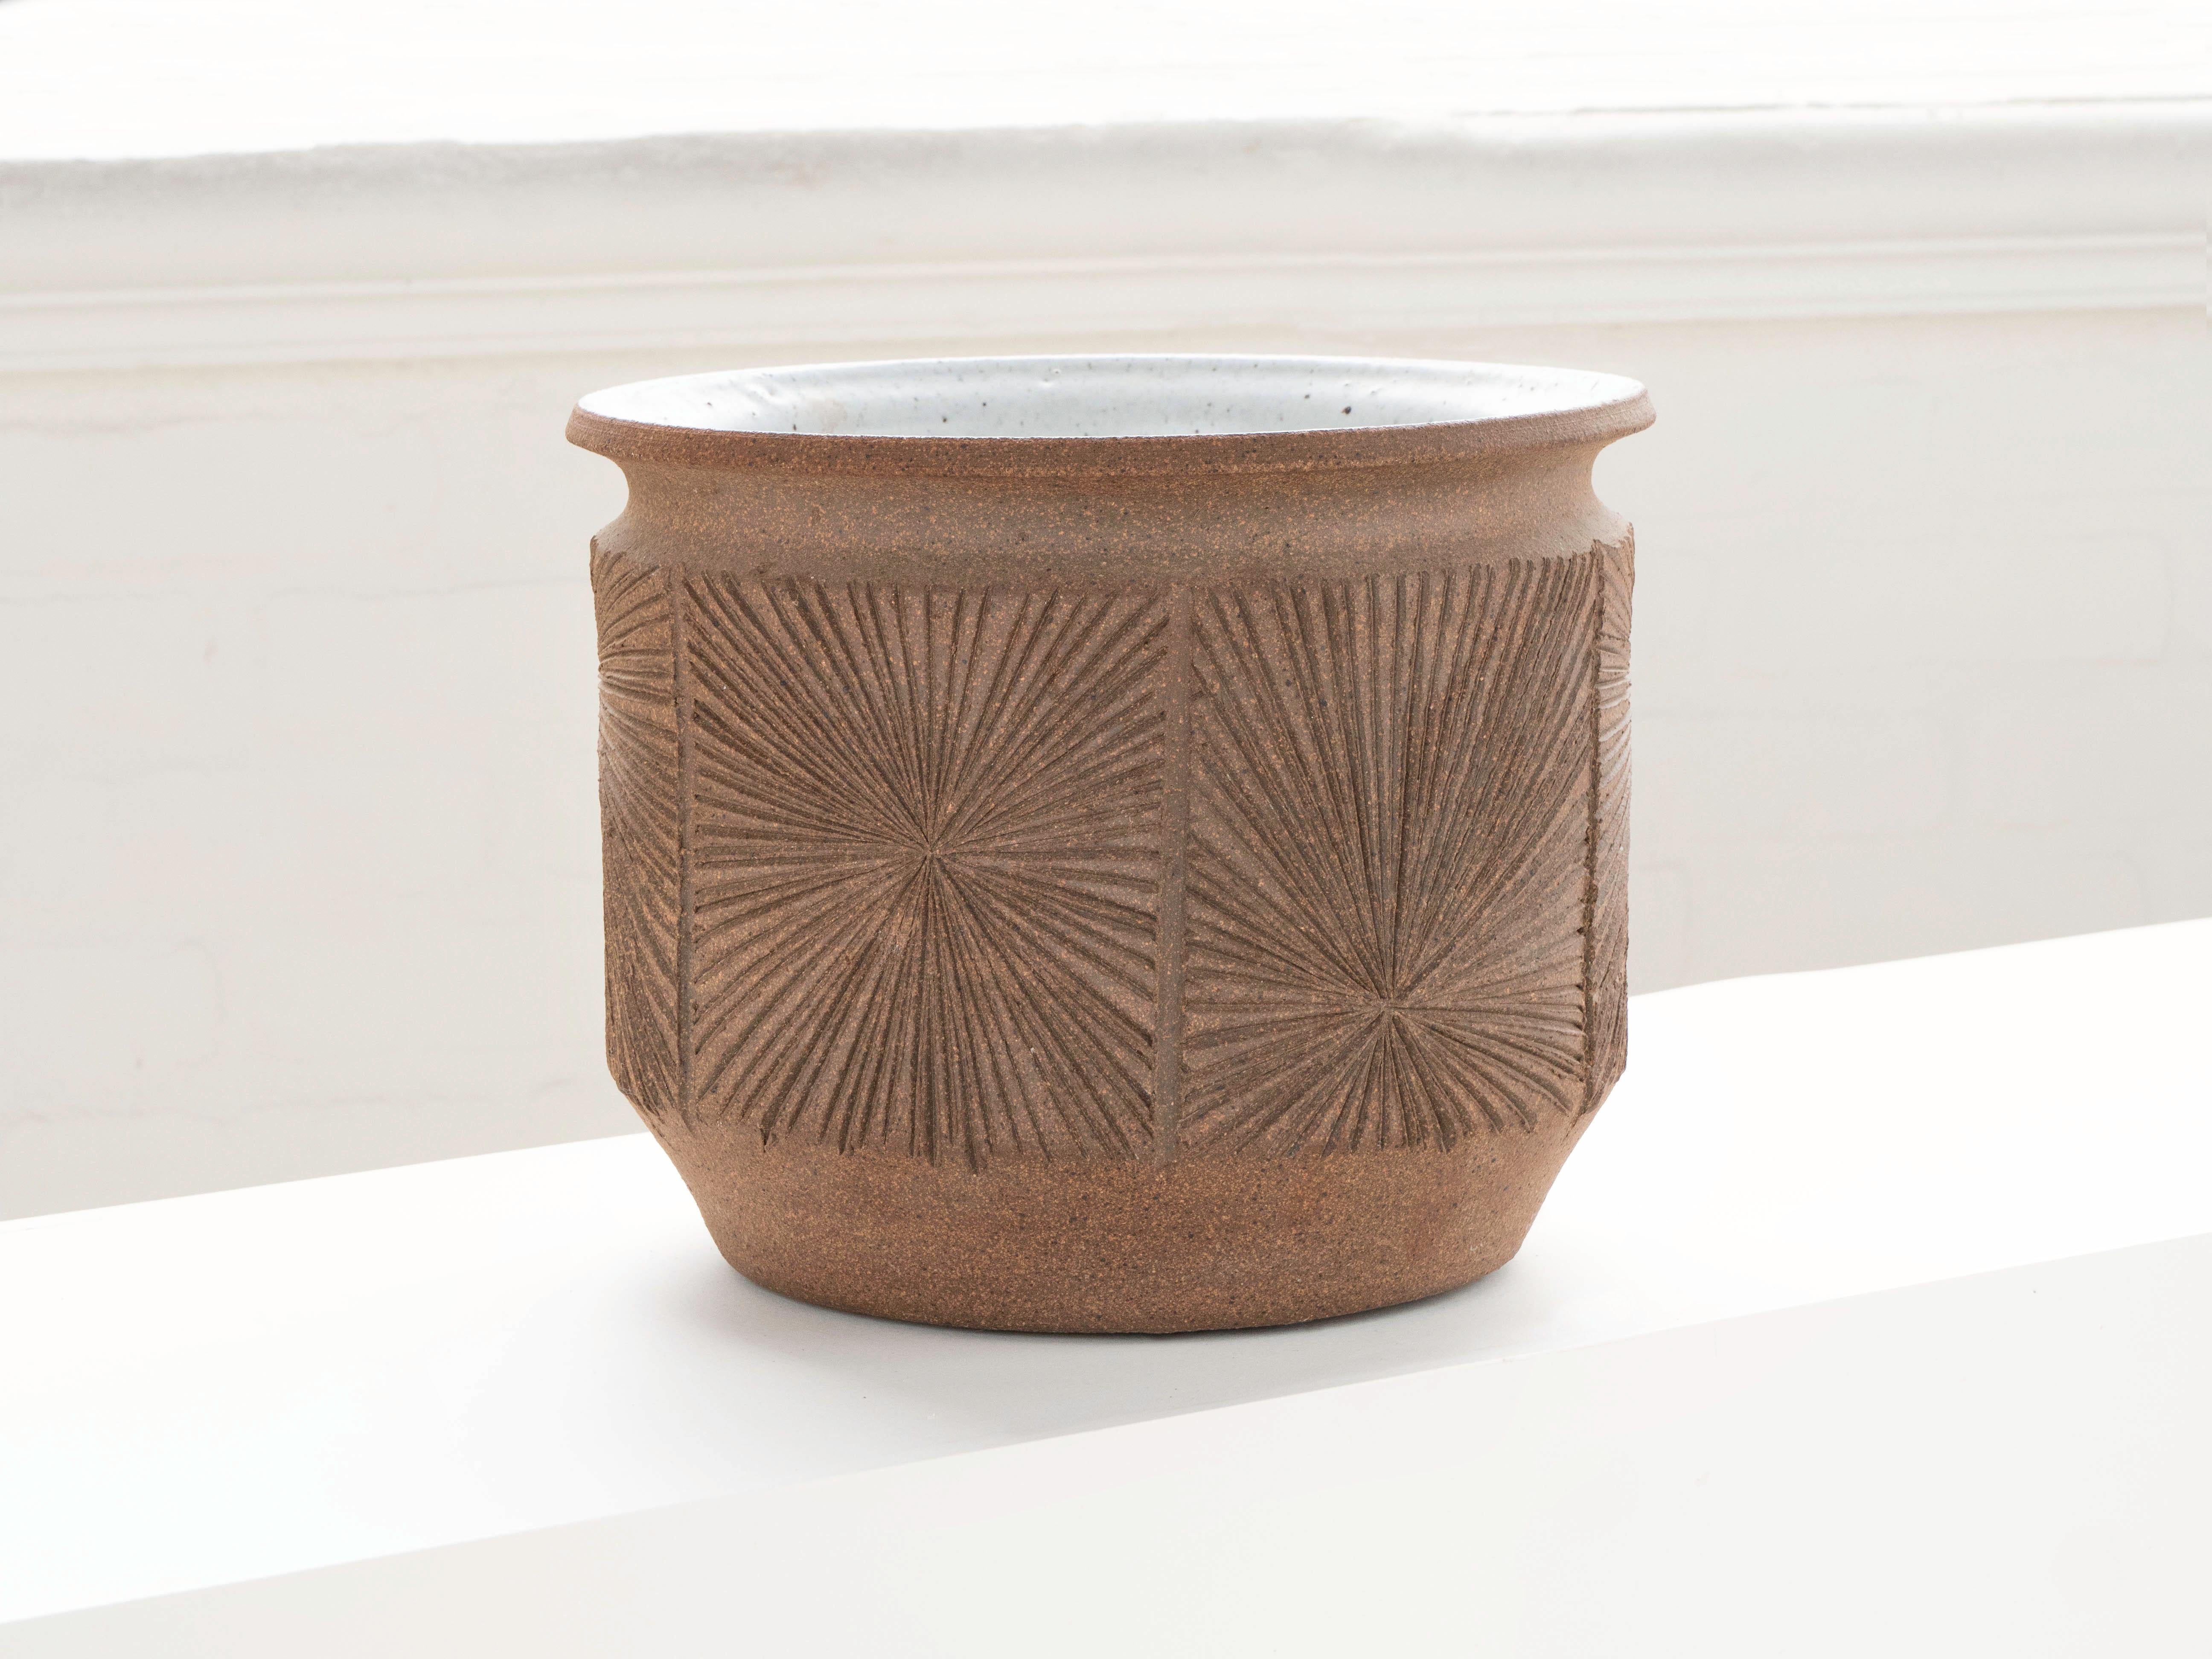 A mid century modern planter by Earthgender.  David Cressey & Robert Maxwell circa 1970's. This piece has hand tooled incisions on the outside forming a pattern referred to as the 